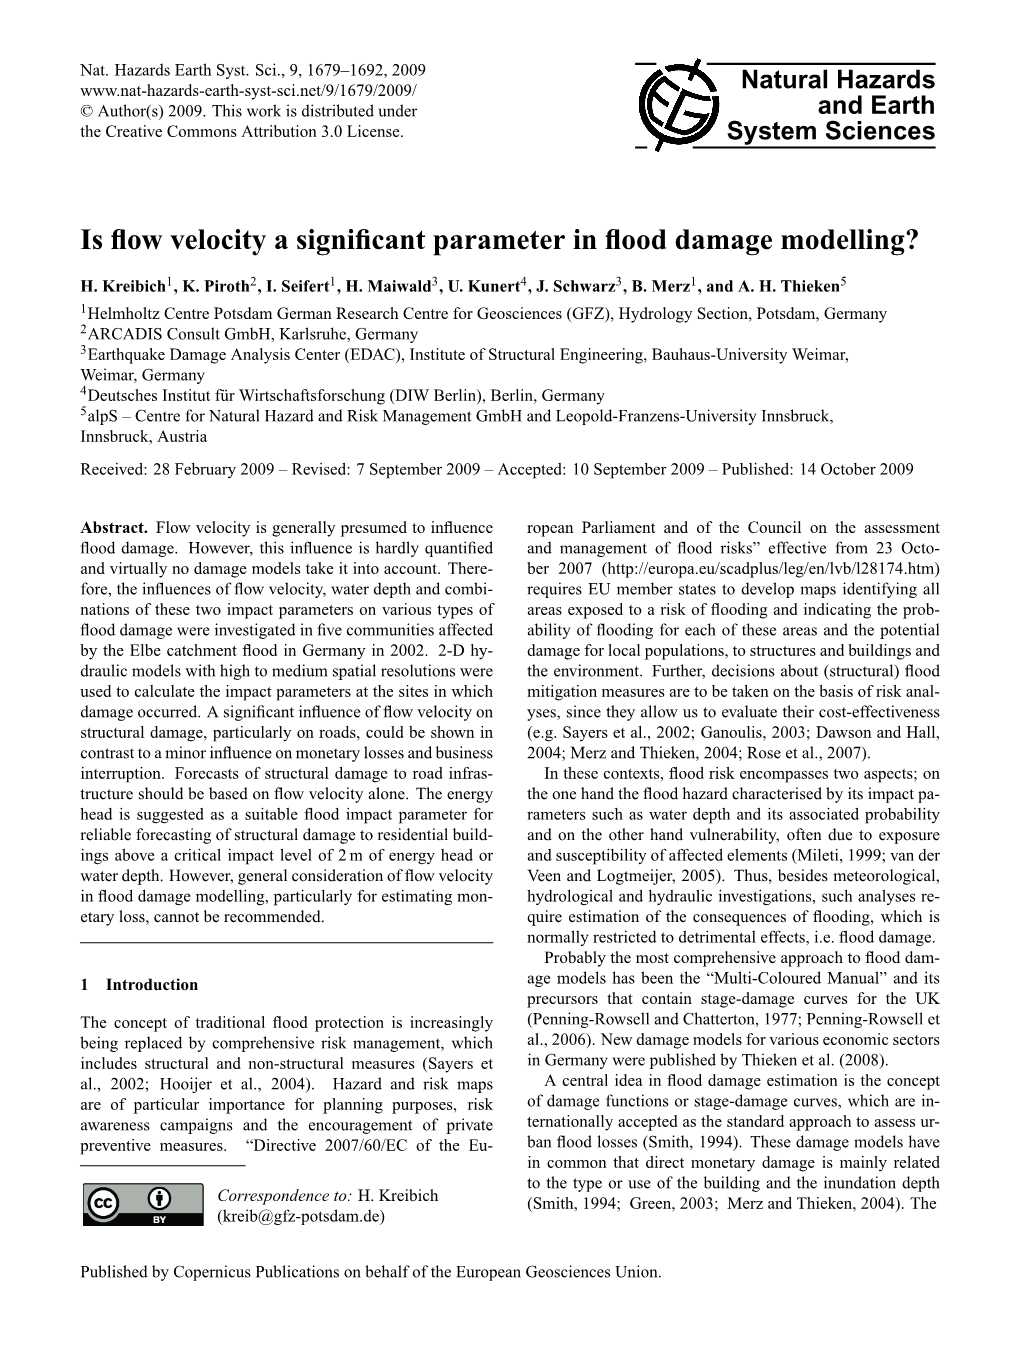 Is Flow Velocity a Significant Parameter in Flood Damage Modelling?